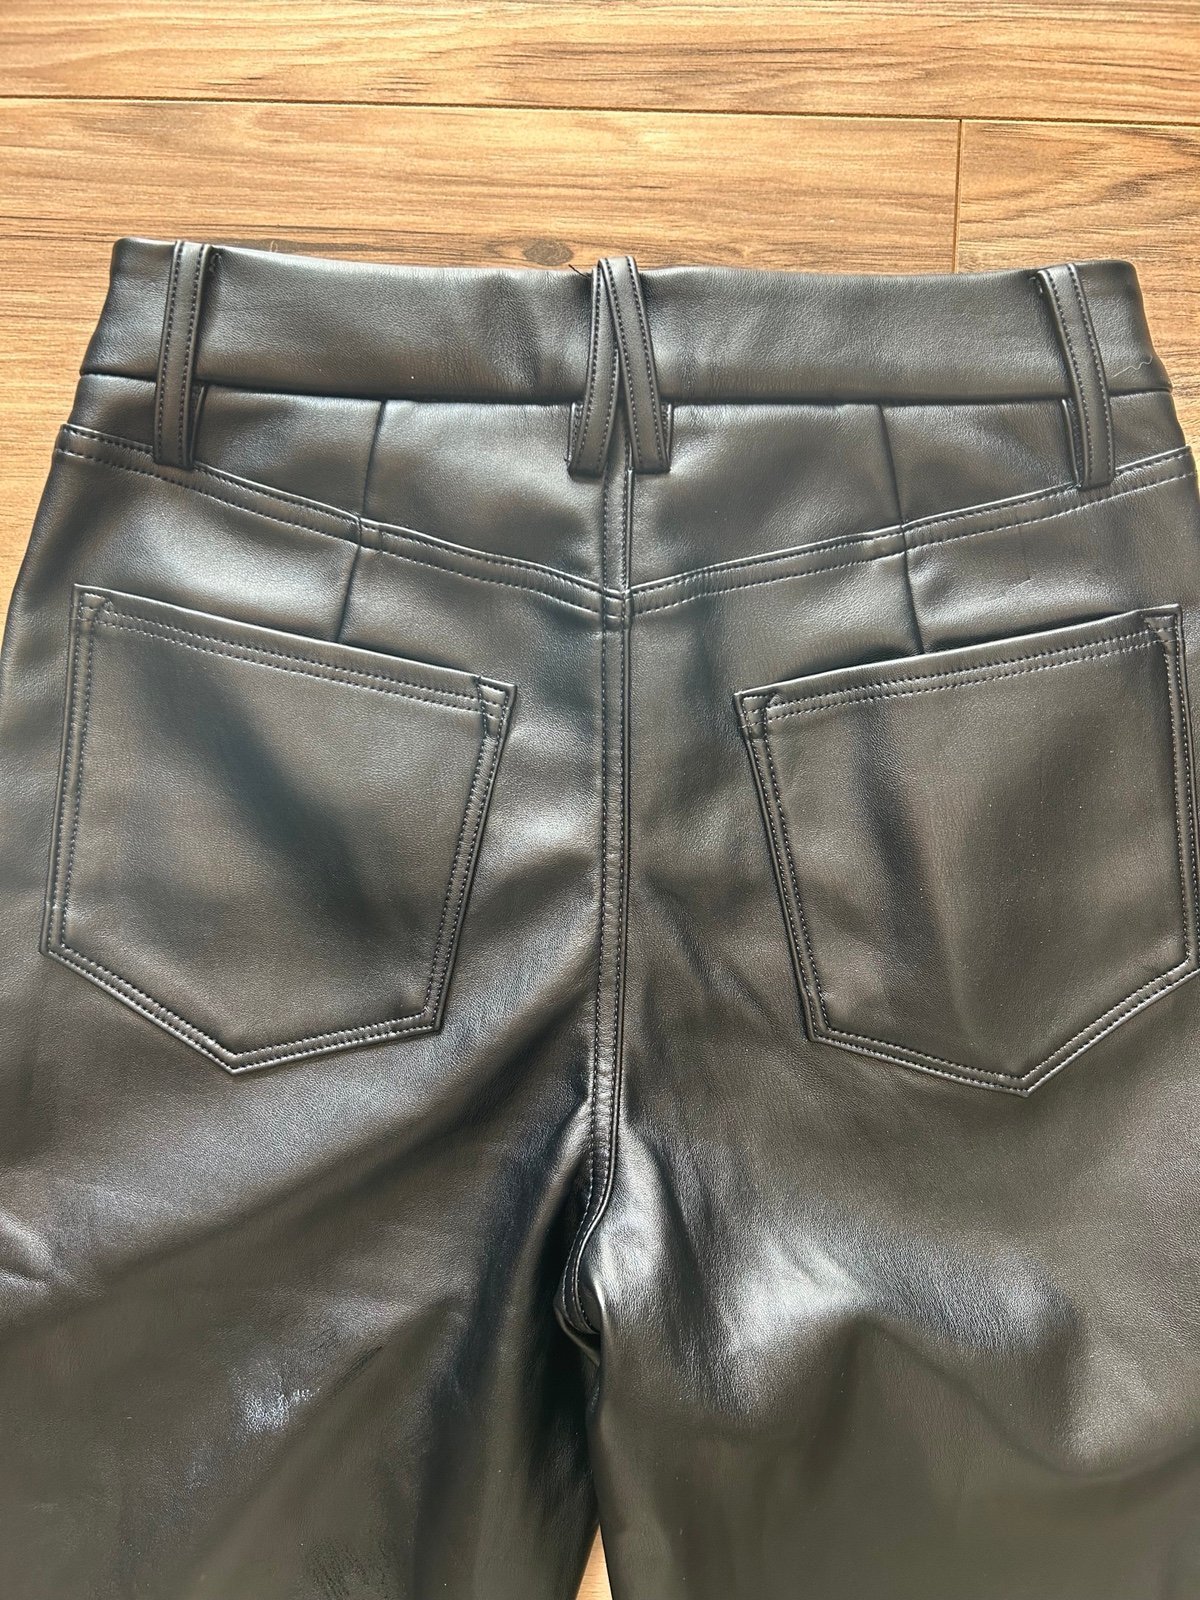 Cheap GOOD AMERICAN - NWOT - GOOD ICON FAUX LEATHER PANTS - size 8 LYdjKopE0 New Style